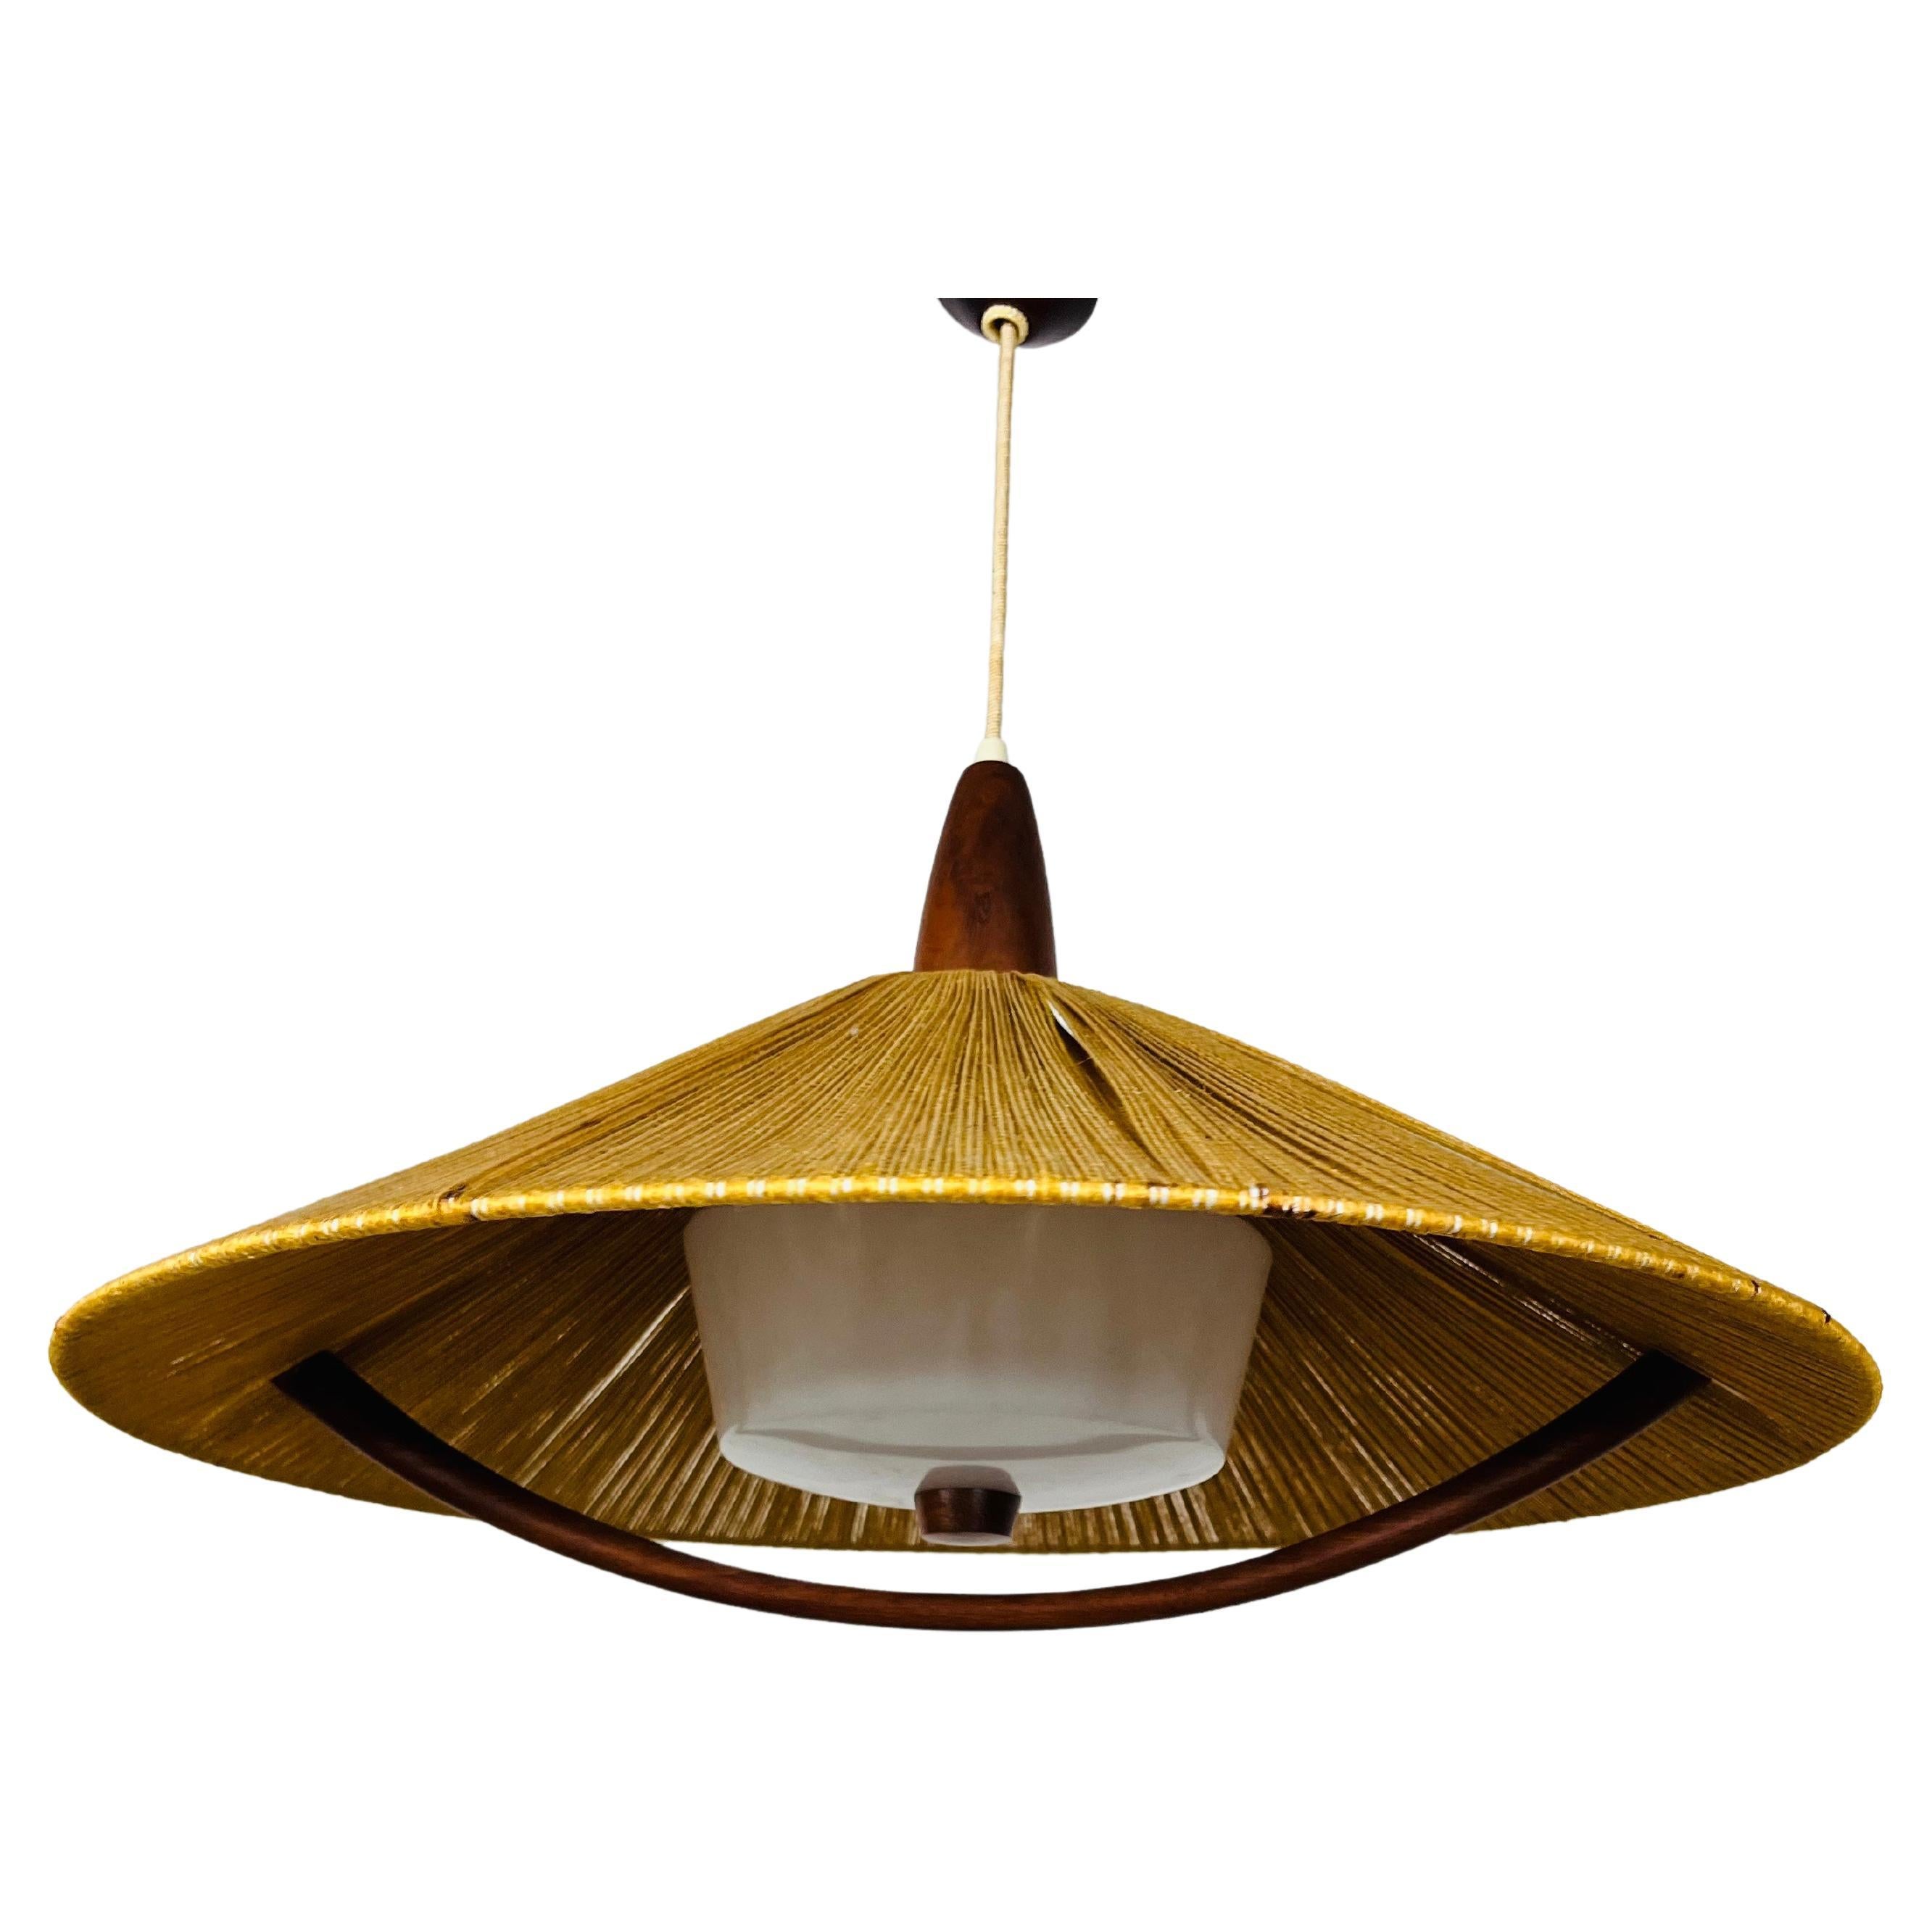 Midcentury Teak and Cord Shade Hanging Lamp by Temde, circa 1960 For Sale